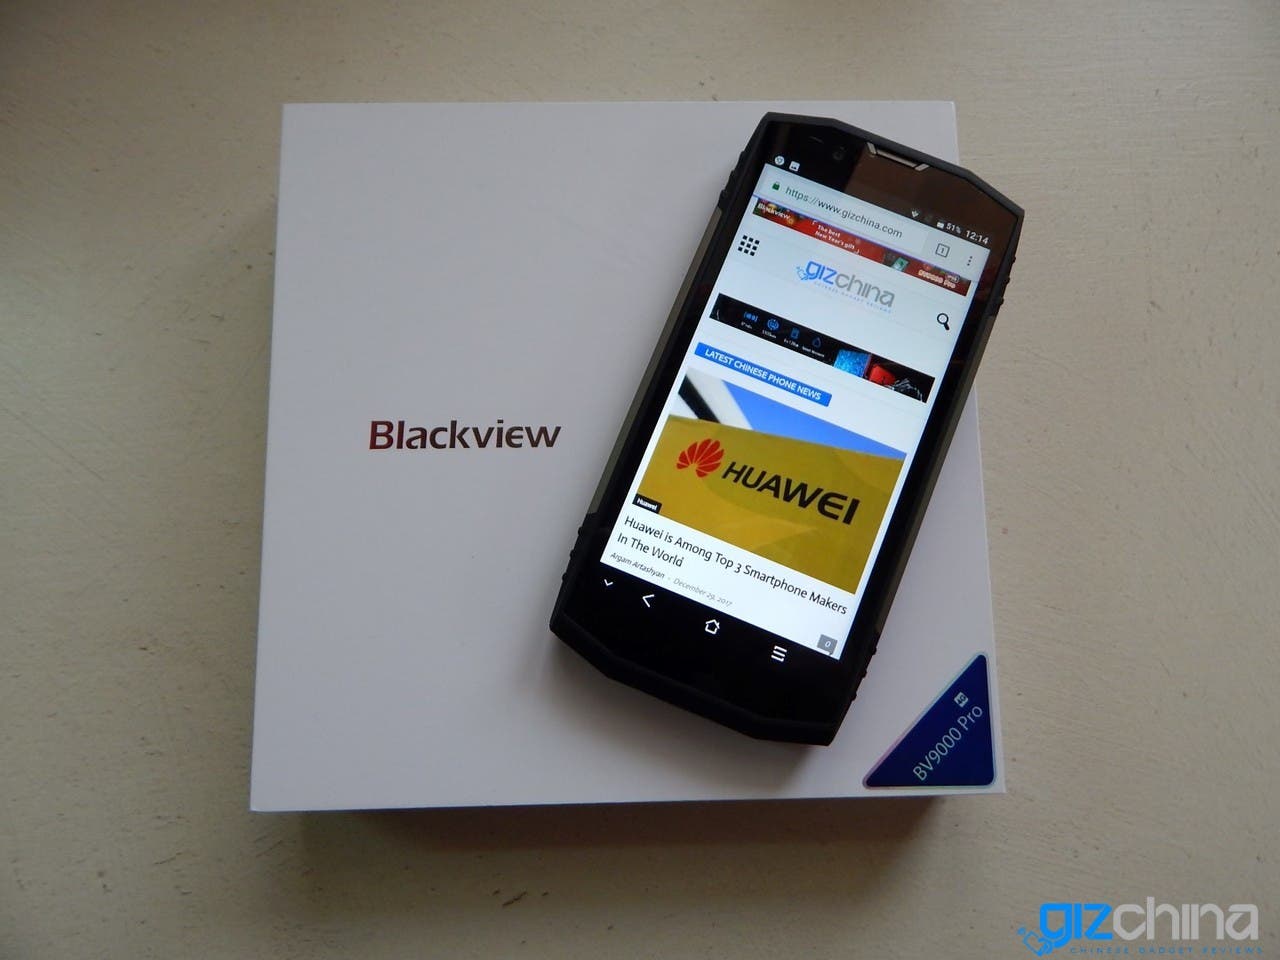 Blackview BV9000 Review - A Rugged phone that doesn't compromise